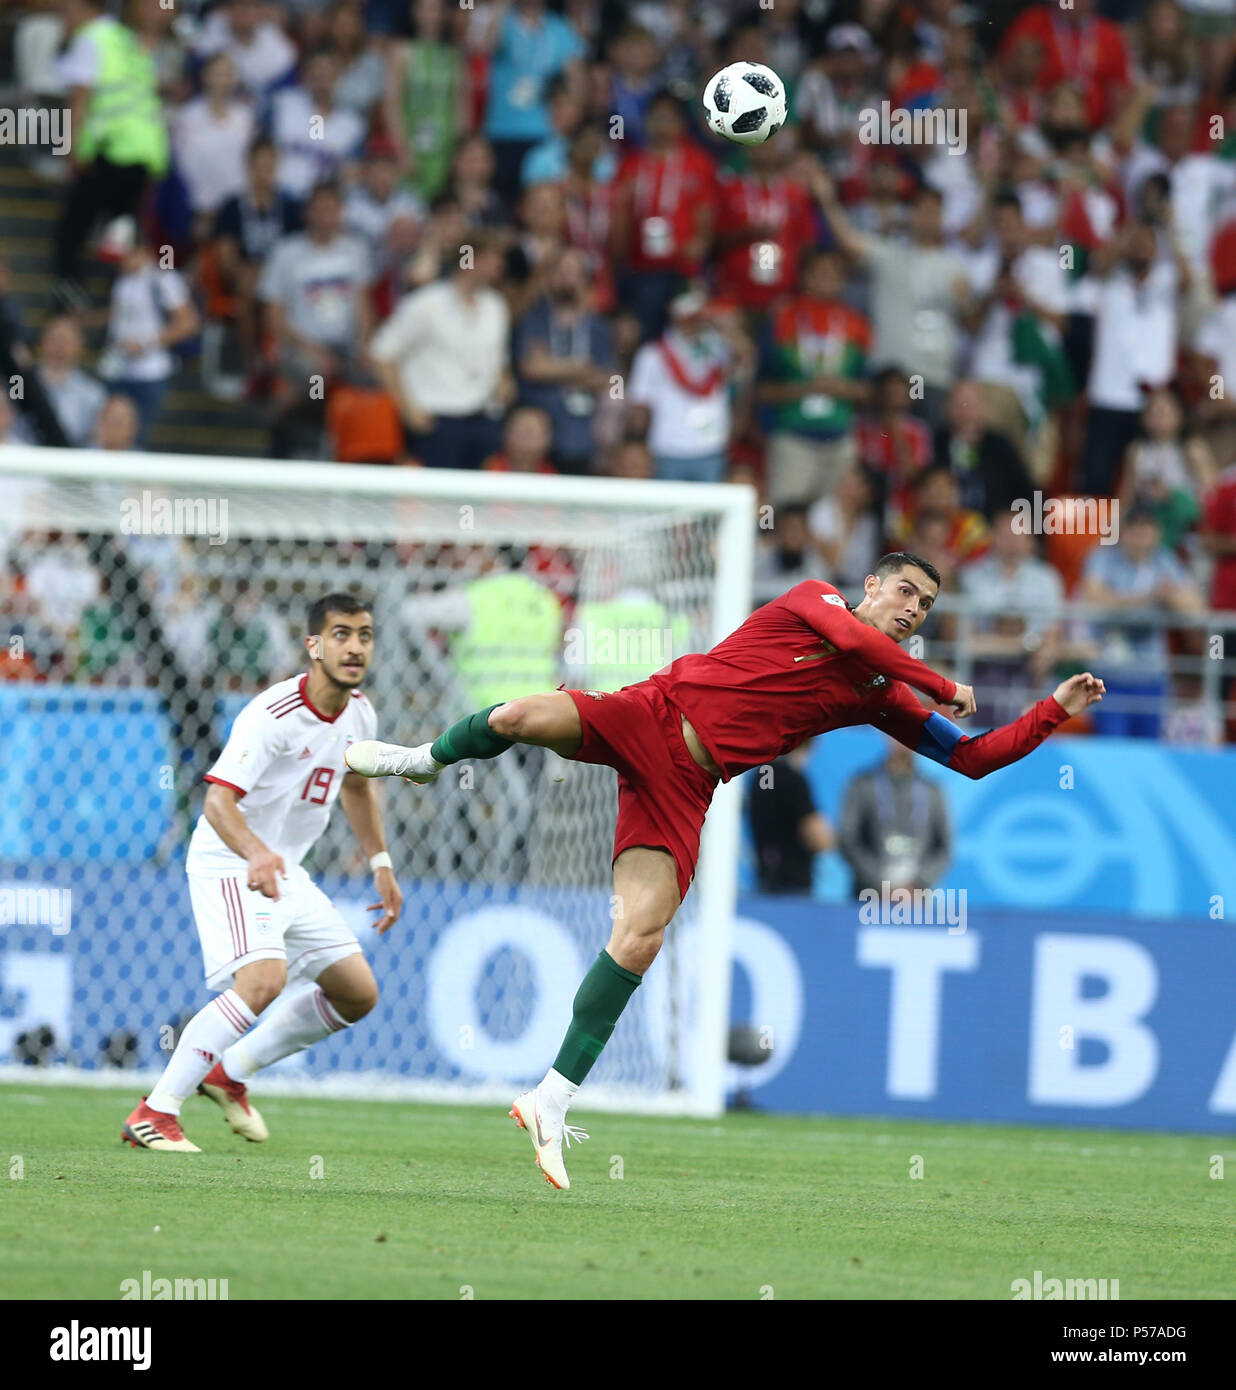 Mordovia Arena, Saransk, Russia,June 25, 2018. CRISTIANO RONALDO  captain of the Portugal Team in action. Portugal survives late surge to advance with 1-1 draw with Iran.  SeshadriSUKUMAR Credit: Seshadri SUKUMAR/Alamy Live News Stock Photo